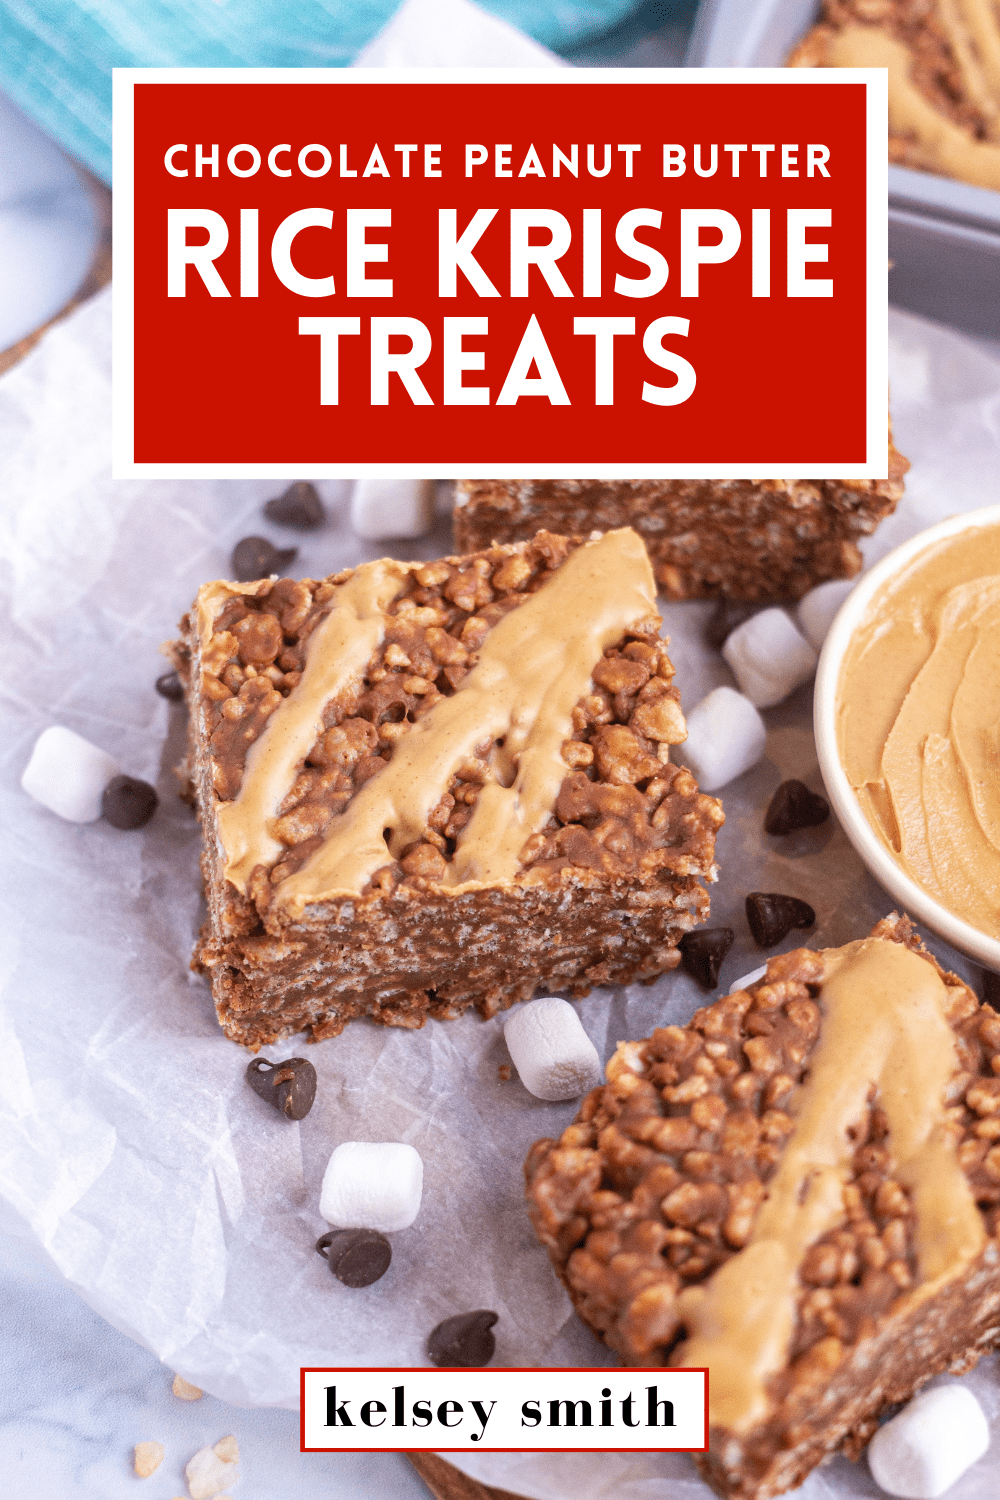 A photo of chocolate peanut butter rice krispie treats on parchment paper. Text overlayed in a box says Chocolate Peanut Butter Rice Krispie Treats.